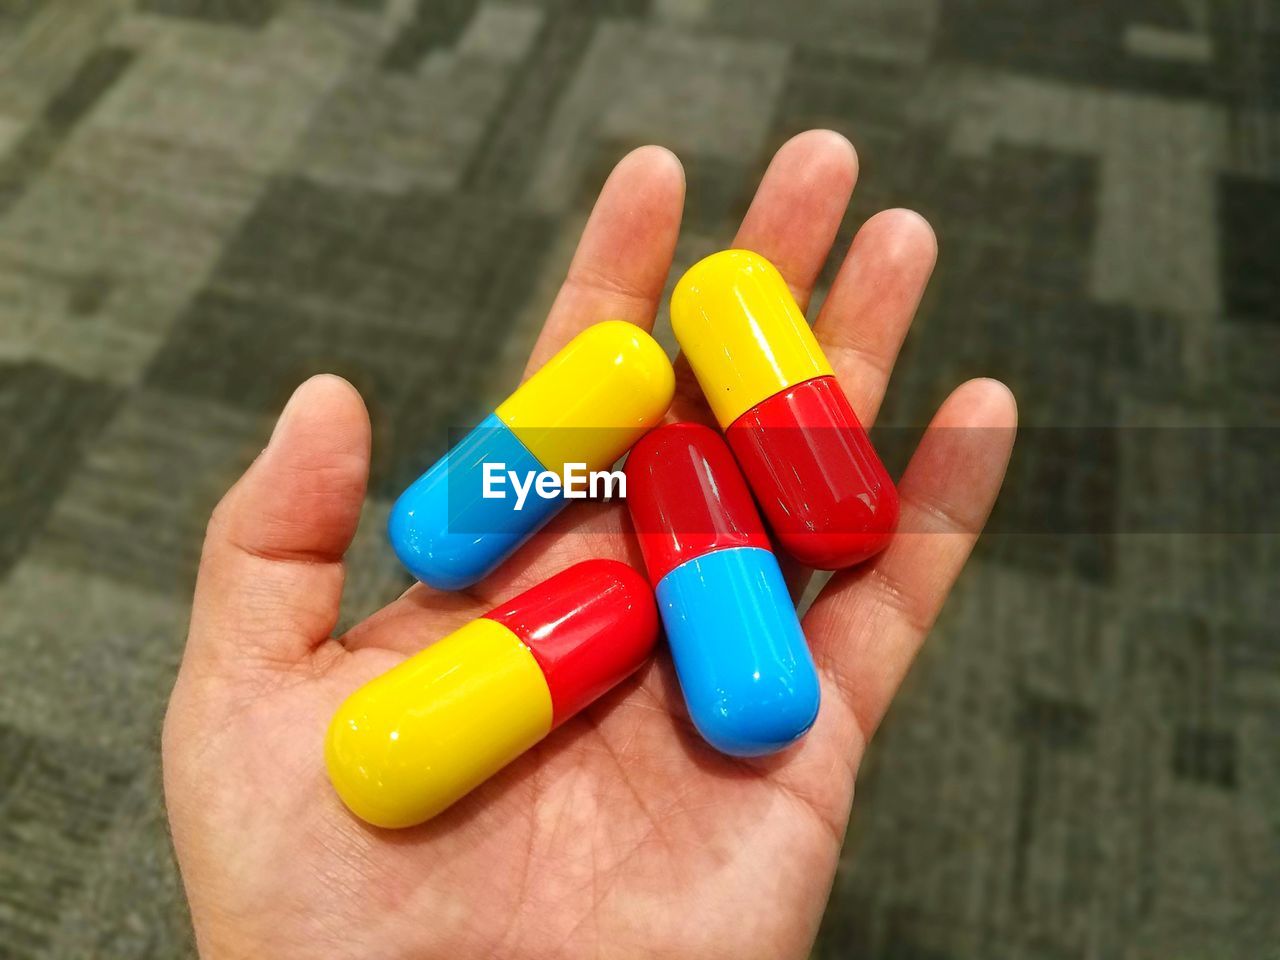 Cropped hand holding artificial capsules